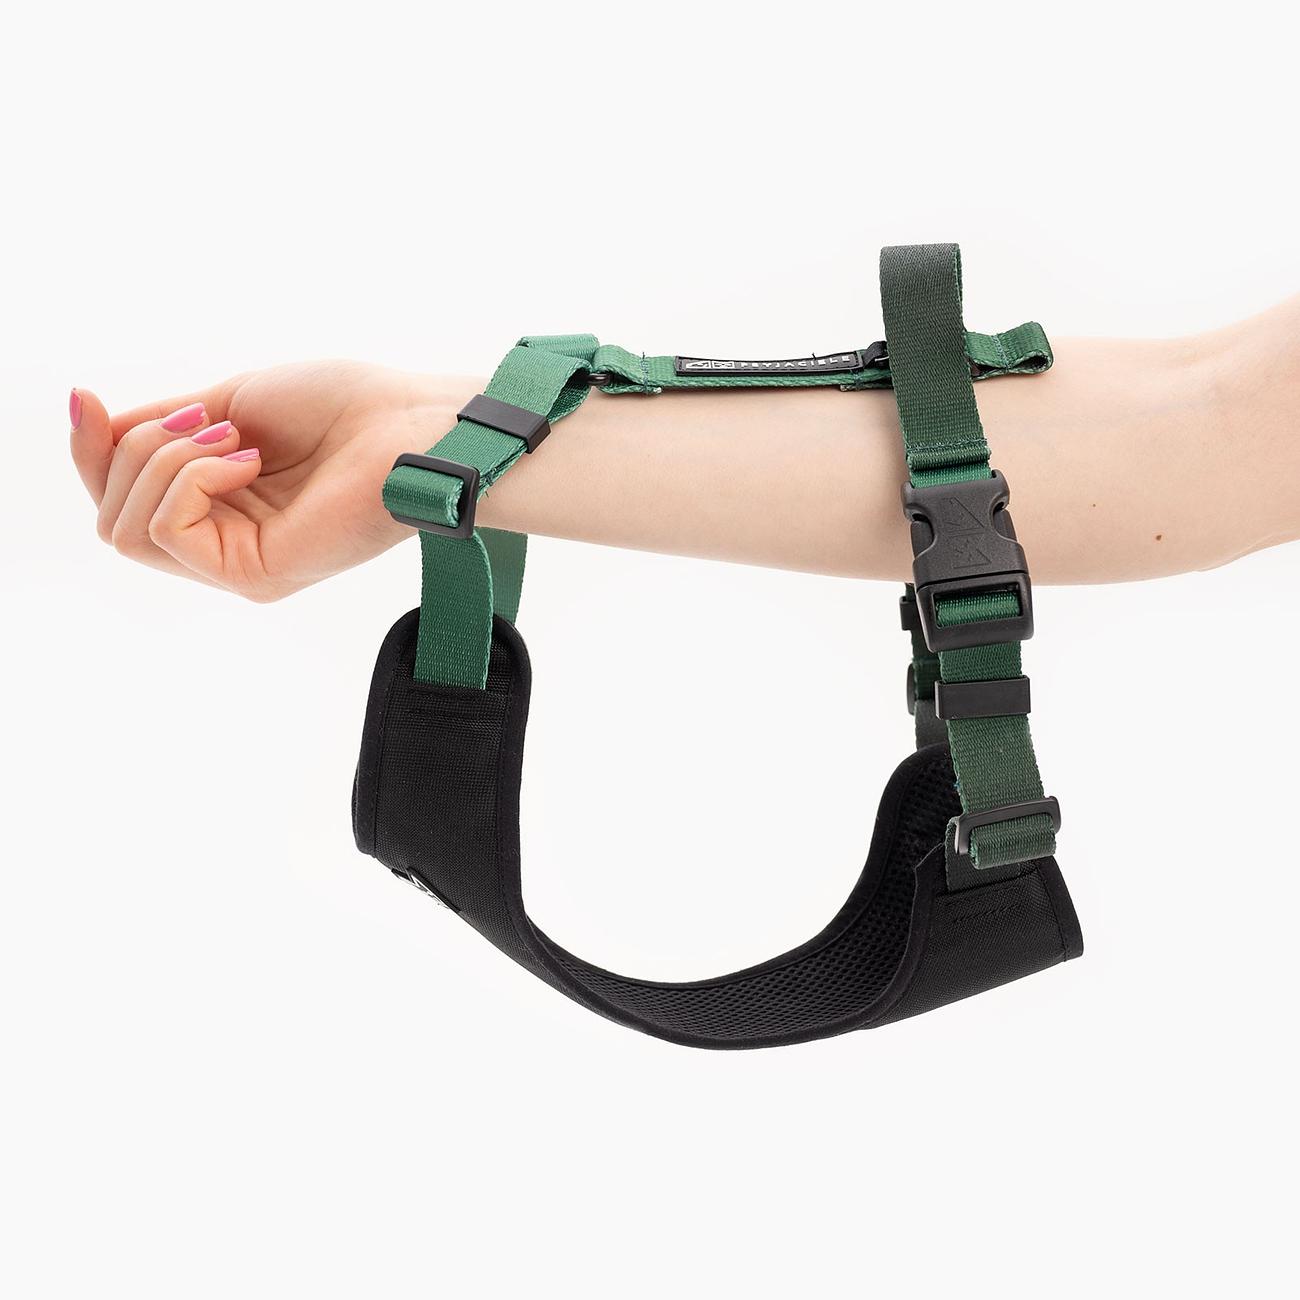 Stay-on pressure-free harness "Under my ombrella" green